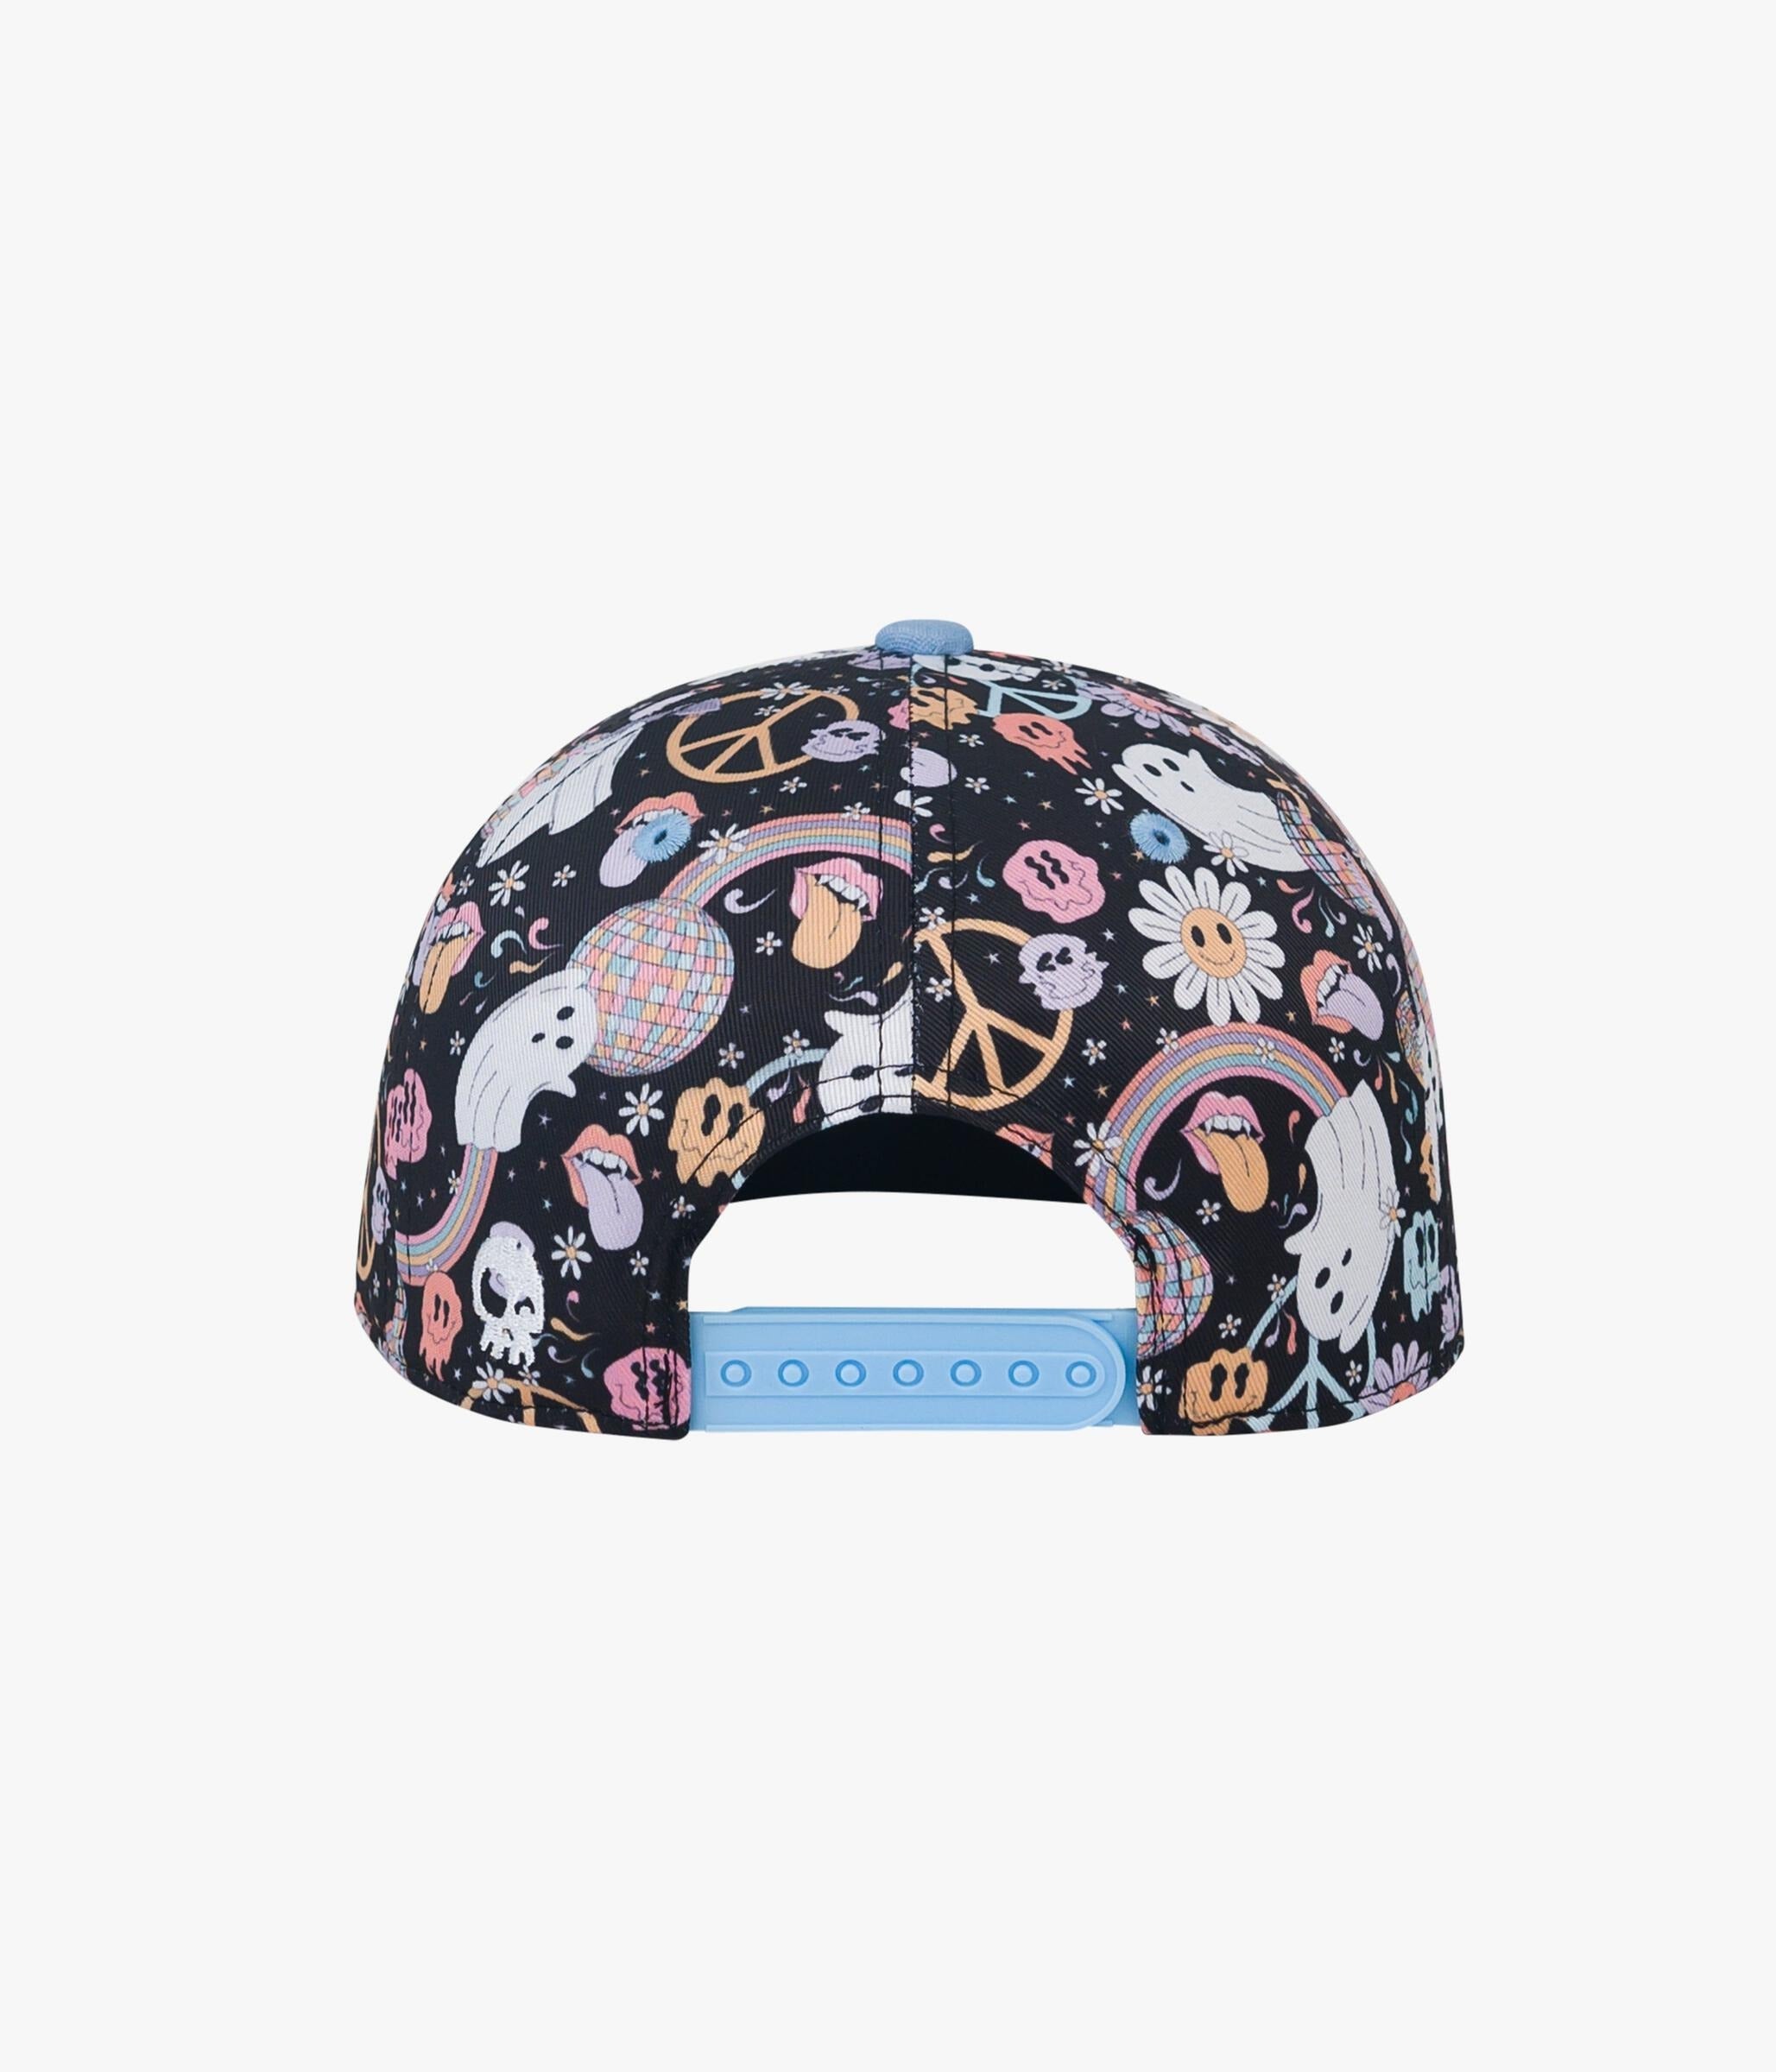 Headster Boo Snapback - Mountain Kids Outfitters